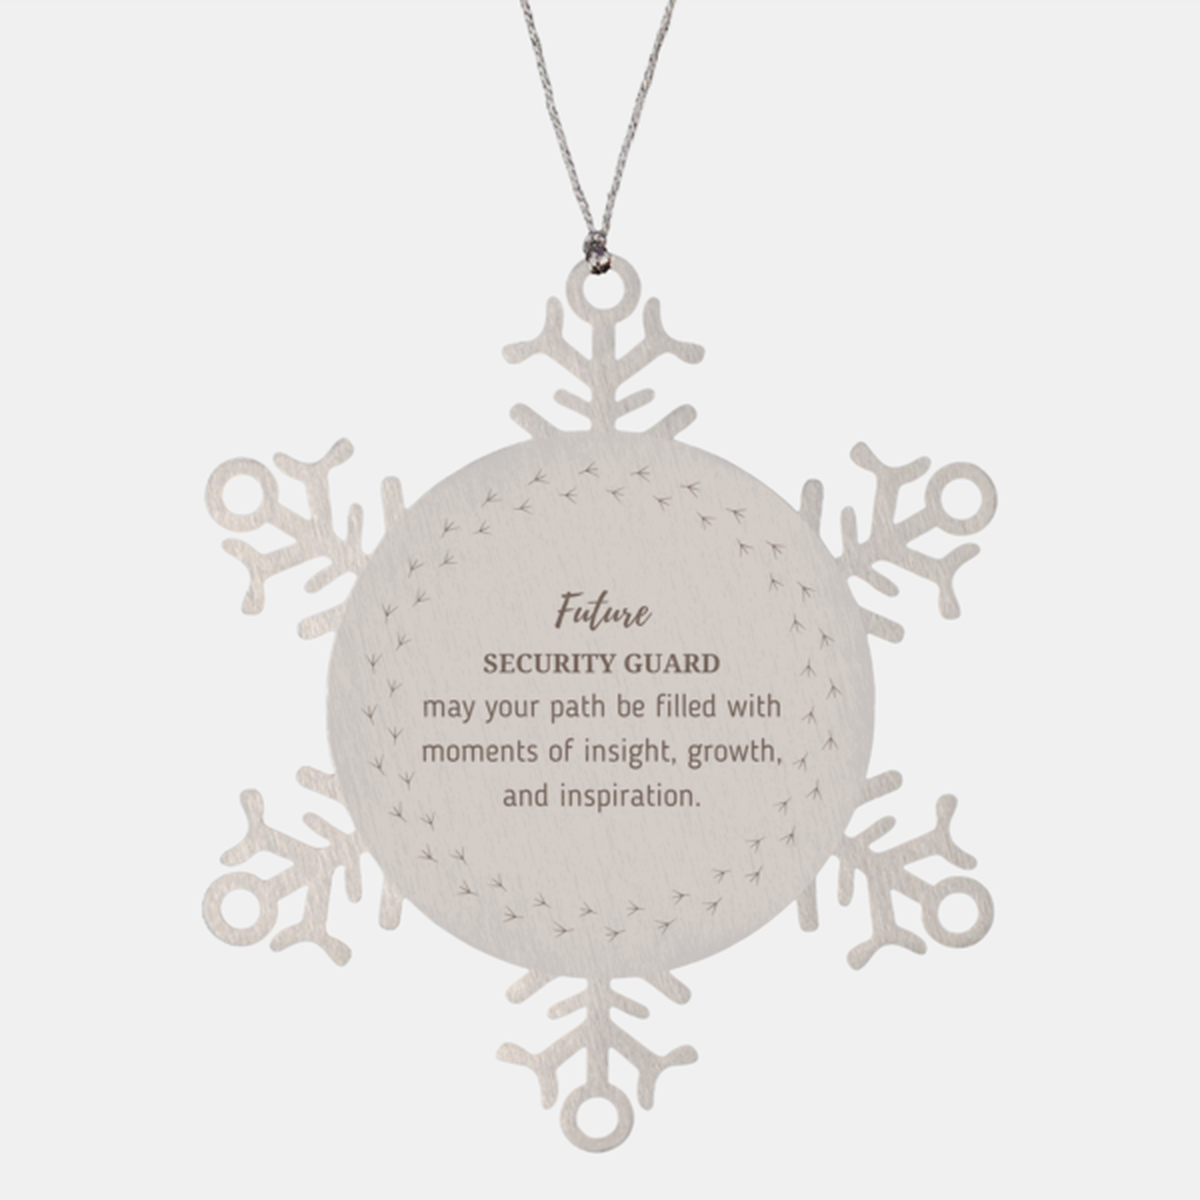 Future Security Guard Gifts, May your path be filled with moments of insight, Graduation Gifts for New Security Guard, Christmas Unique Snowflake Ornament For Men, Women, Friends